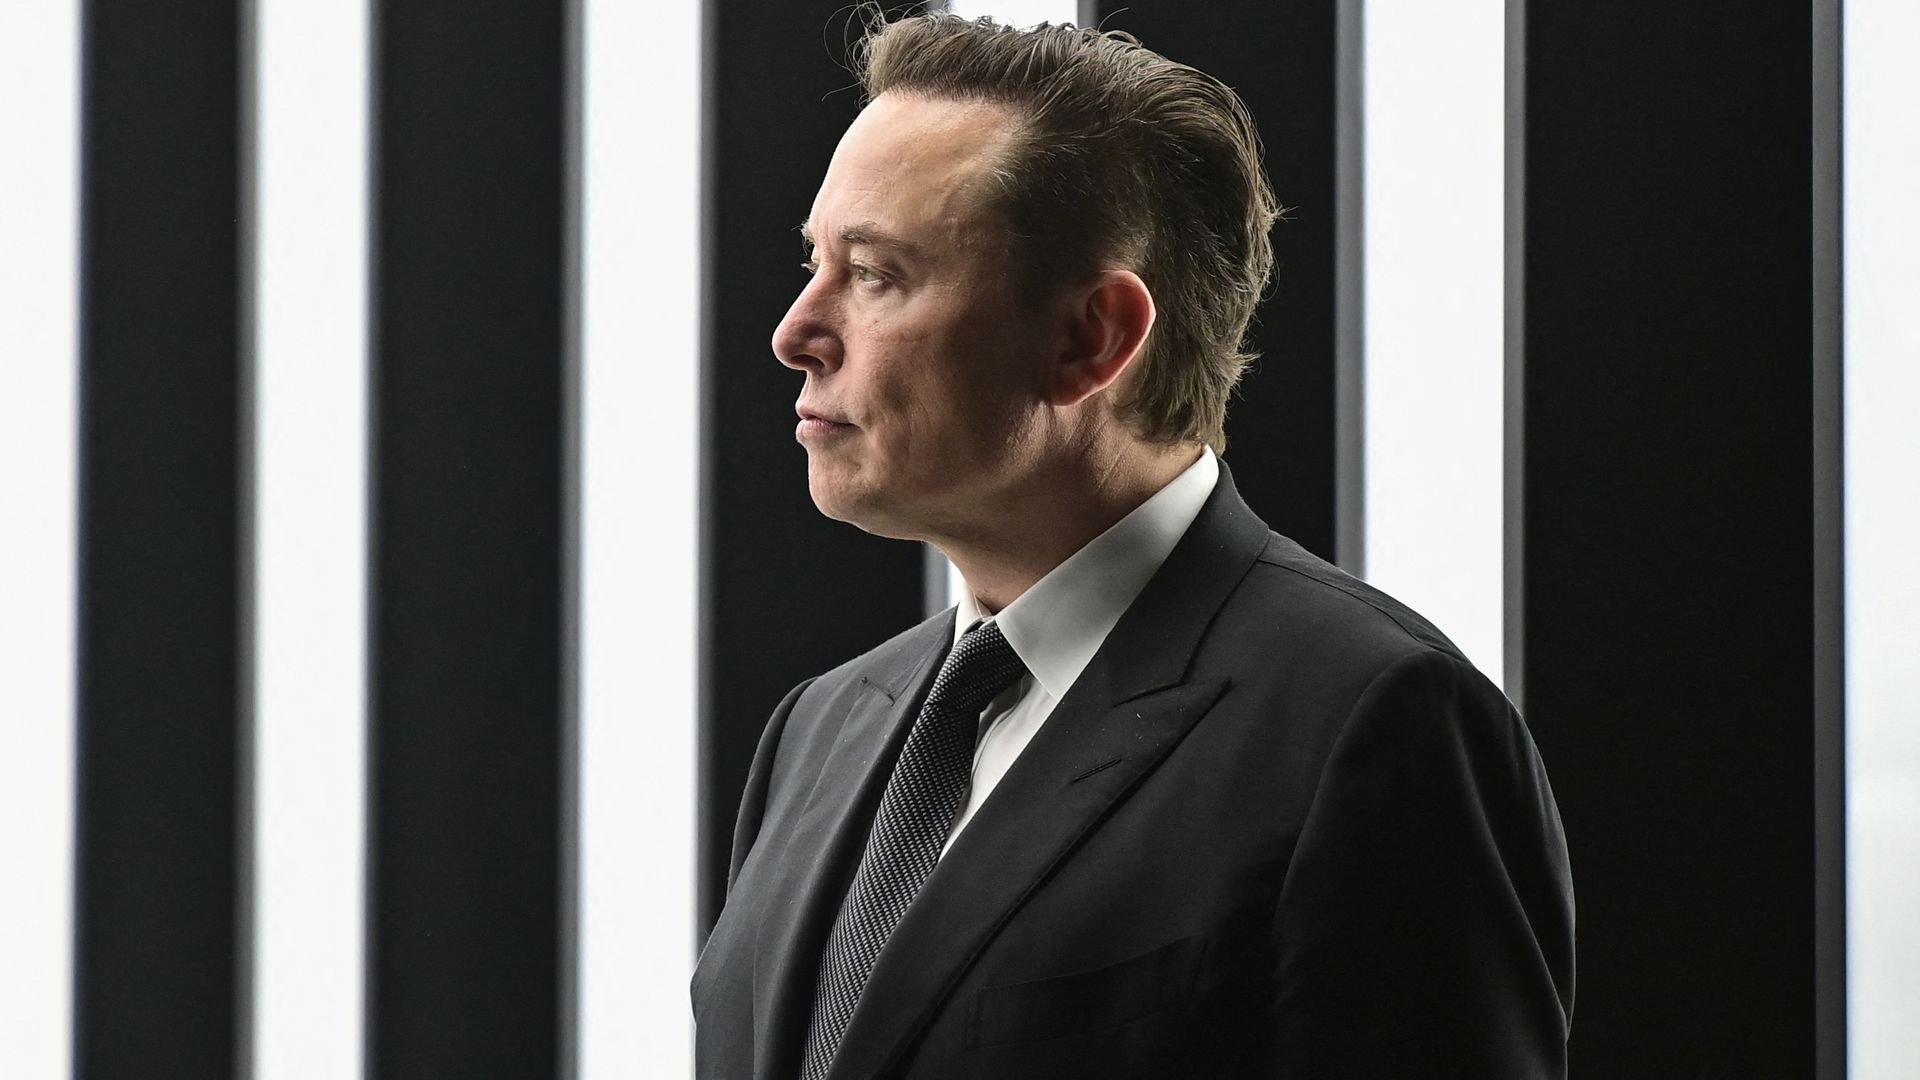 Tesla CEO Elon Musk is pictured as he attends the start of the production at Tesla's "Gigafactory."